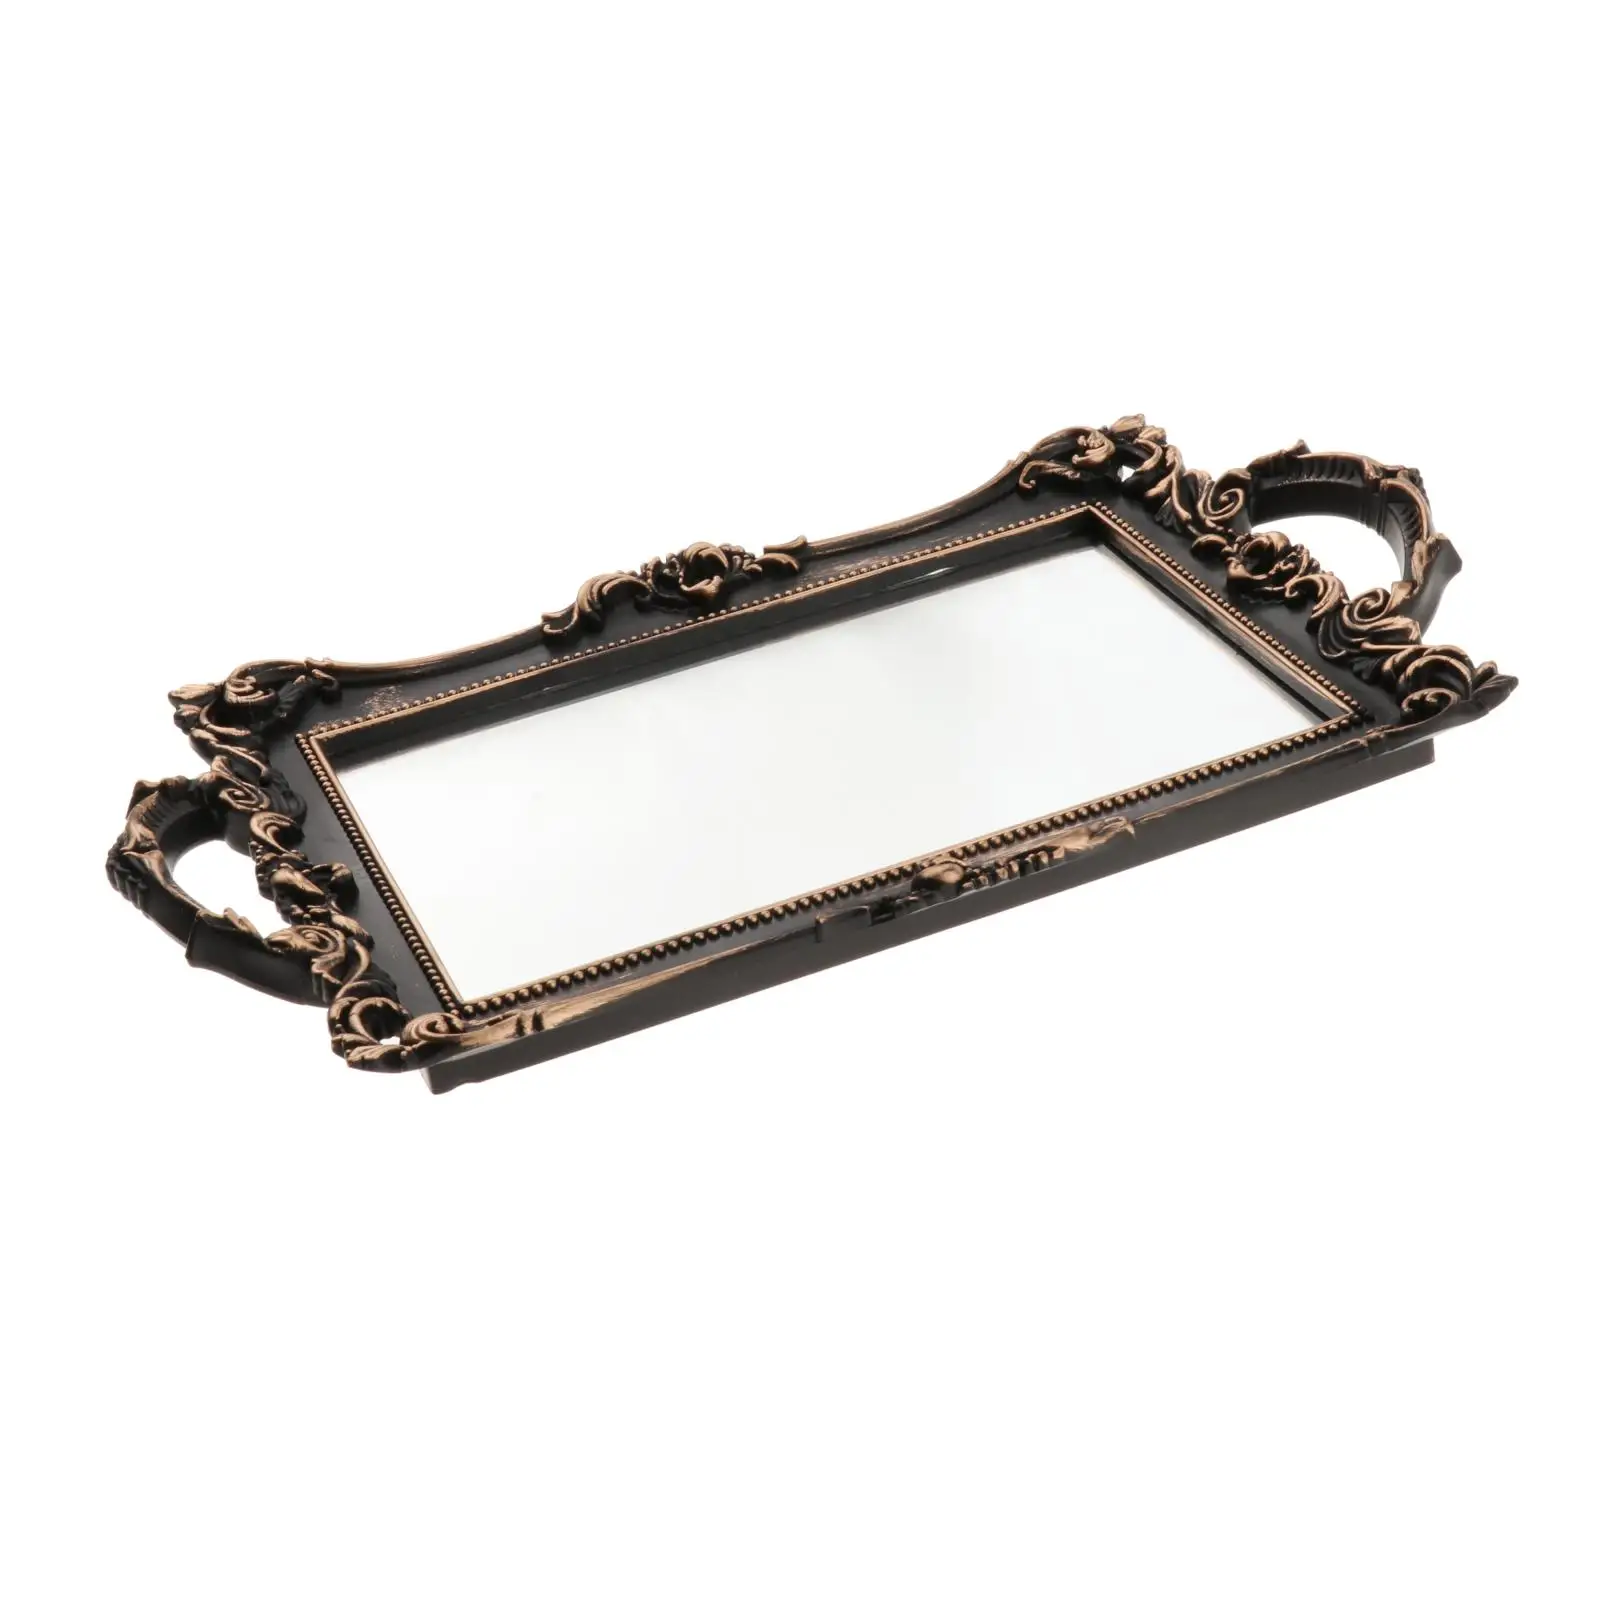 Mirrored Vintage Vanity Makeup Tray Ornate Jewelry Trinket Tray Organizer Cosmetic Perfume Serving Tray Home Dresser Decor